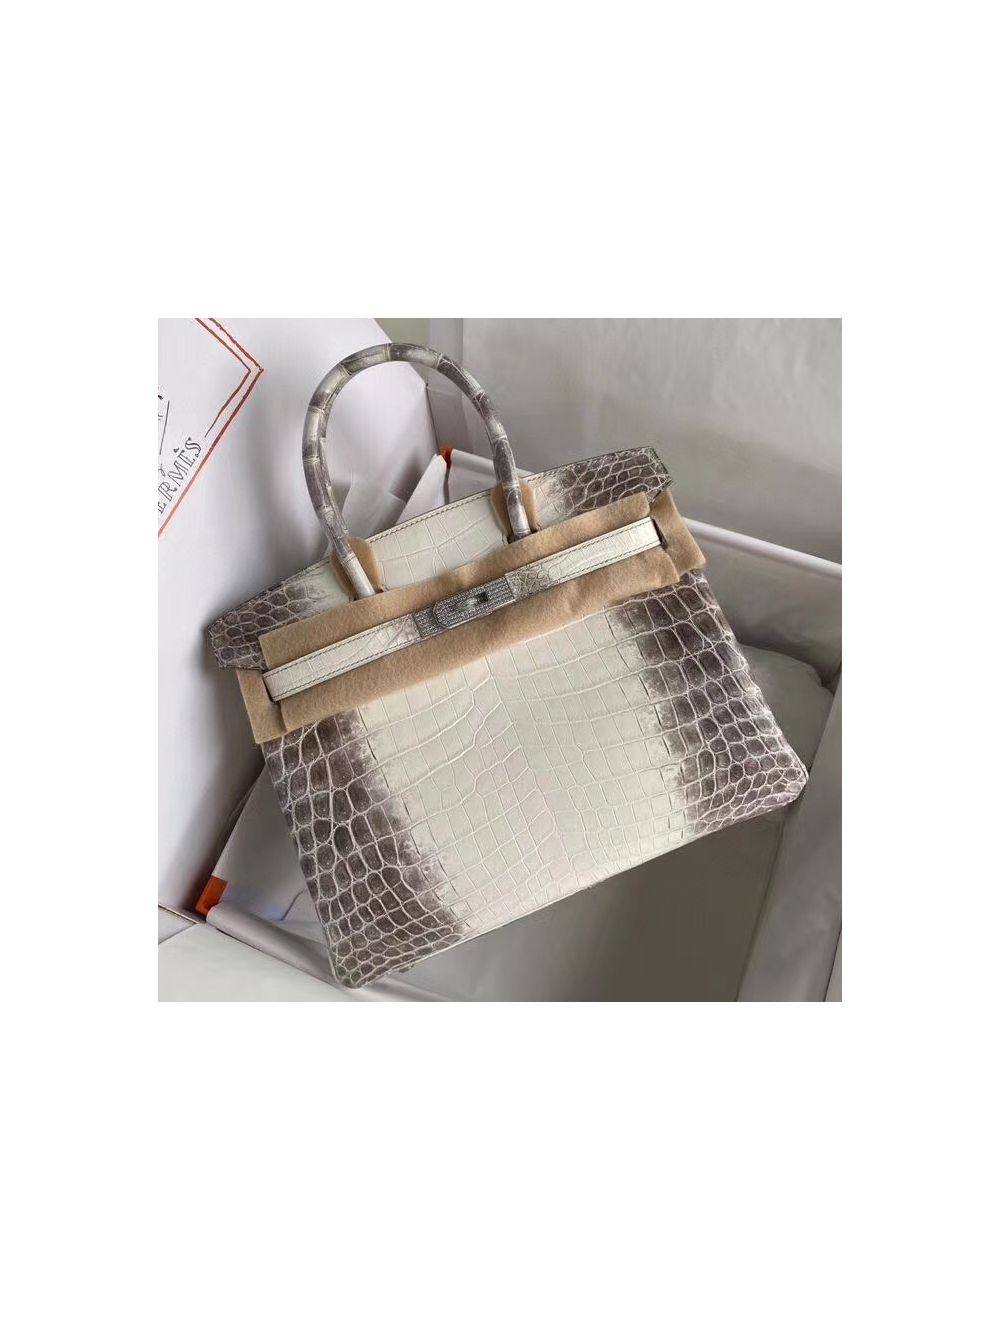 Replica Hermes Touch Birkin 25cm Limited Edition Taupe Bag